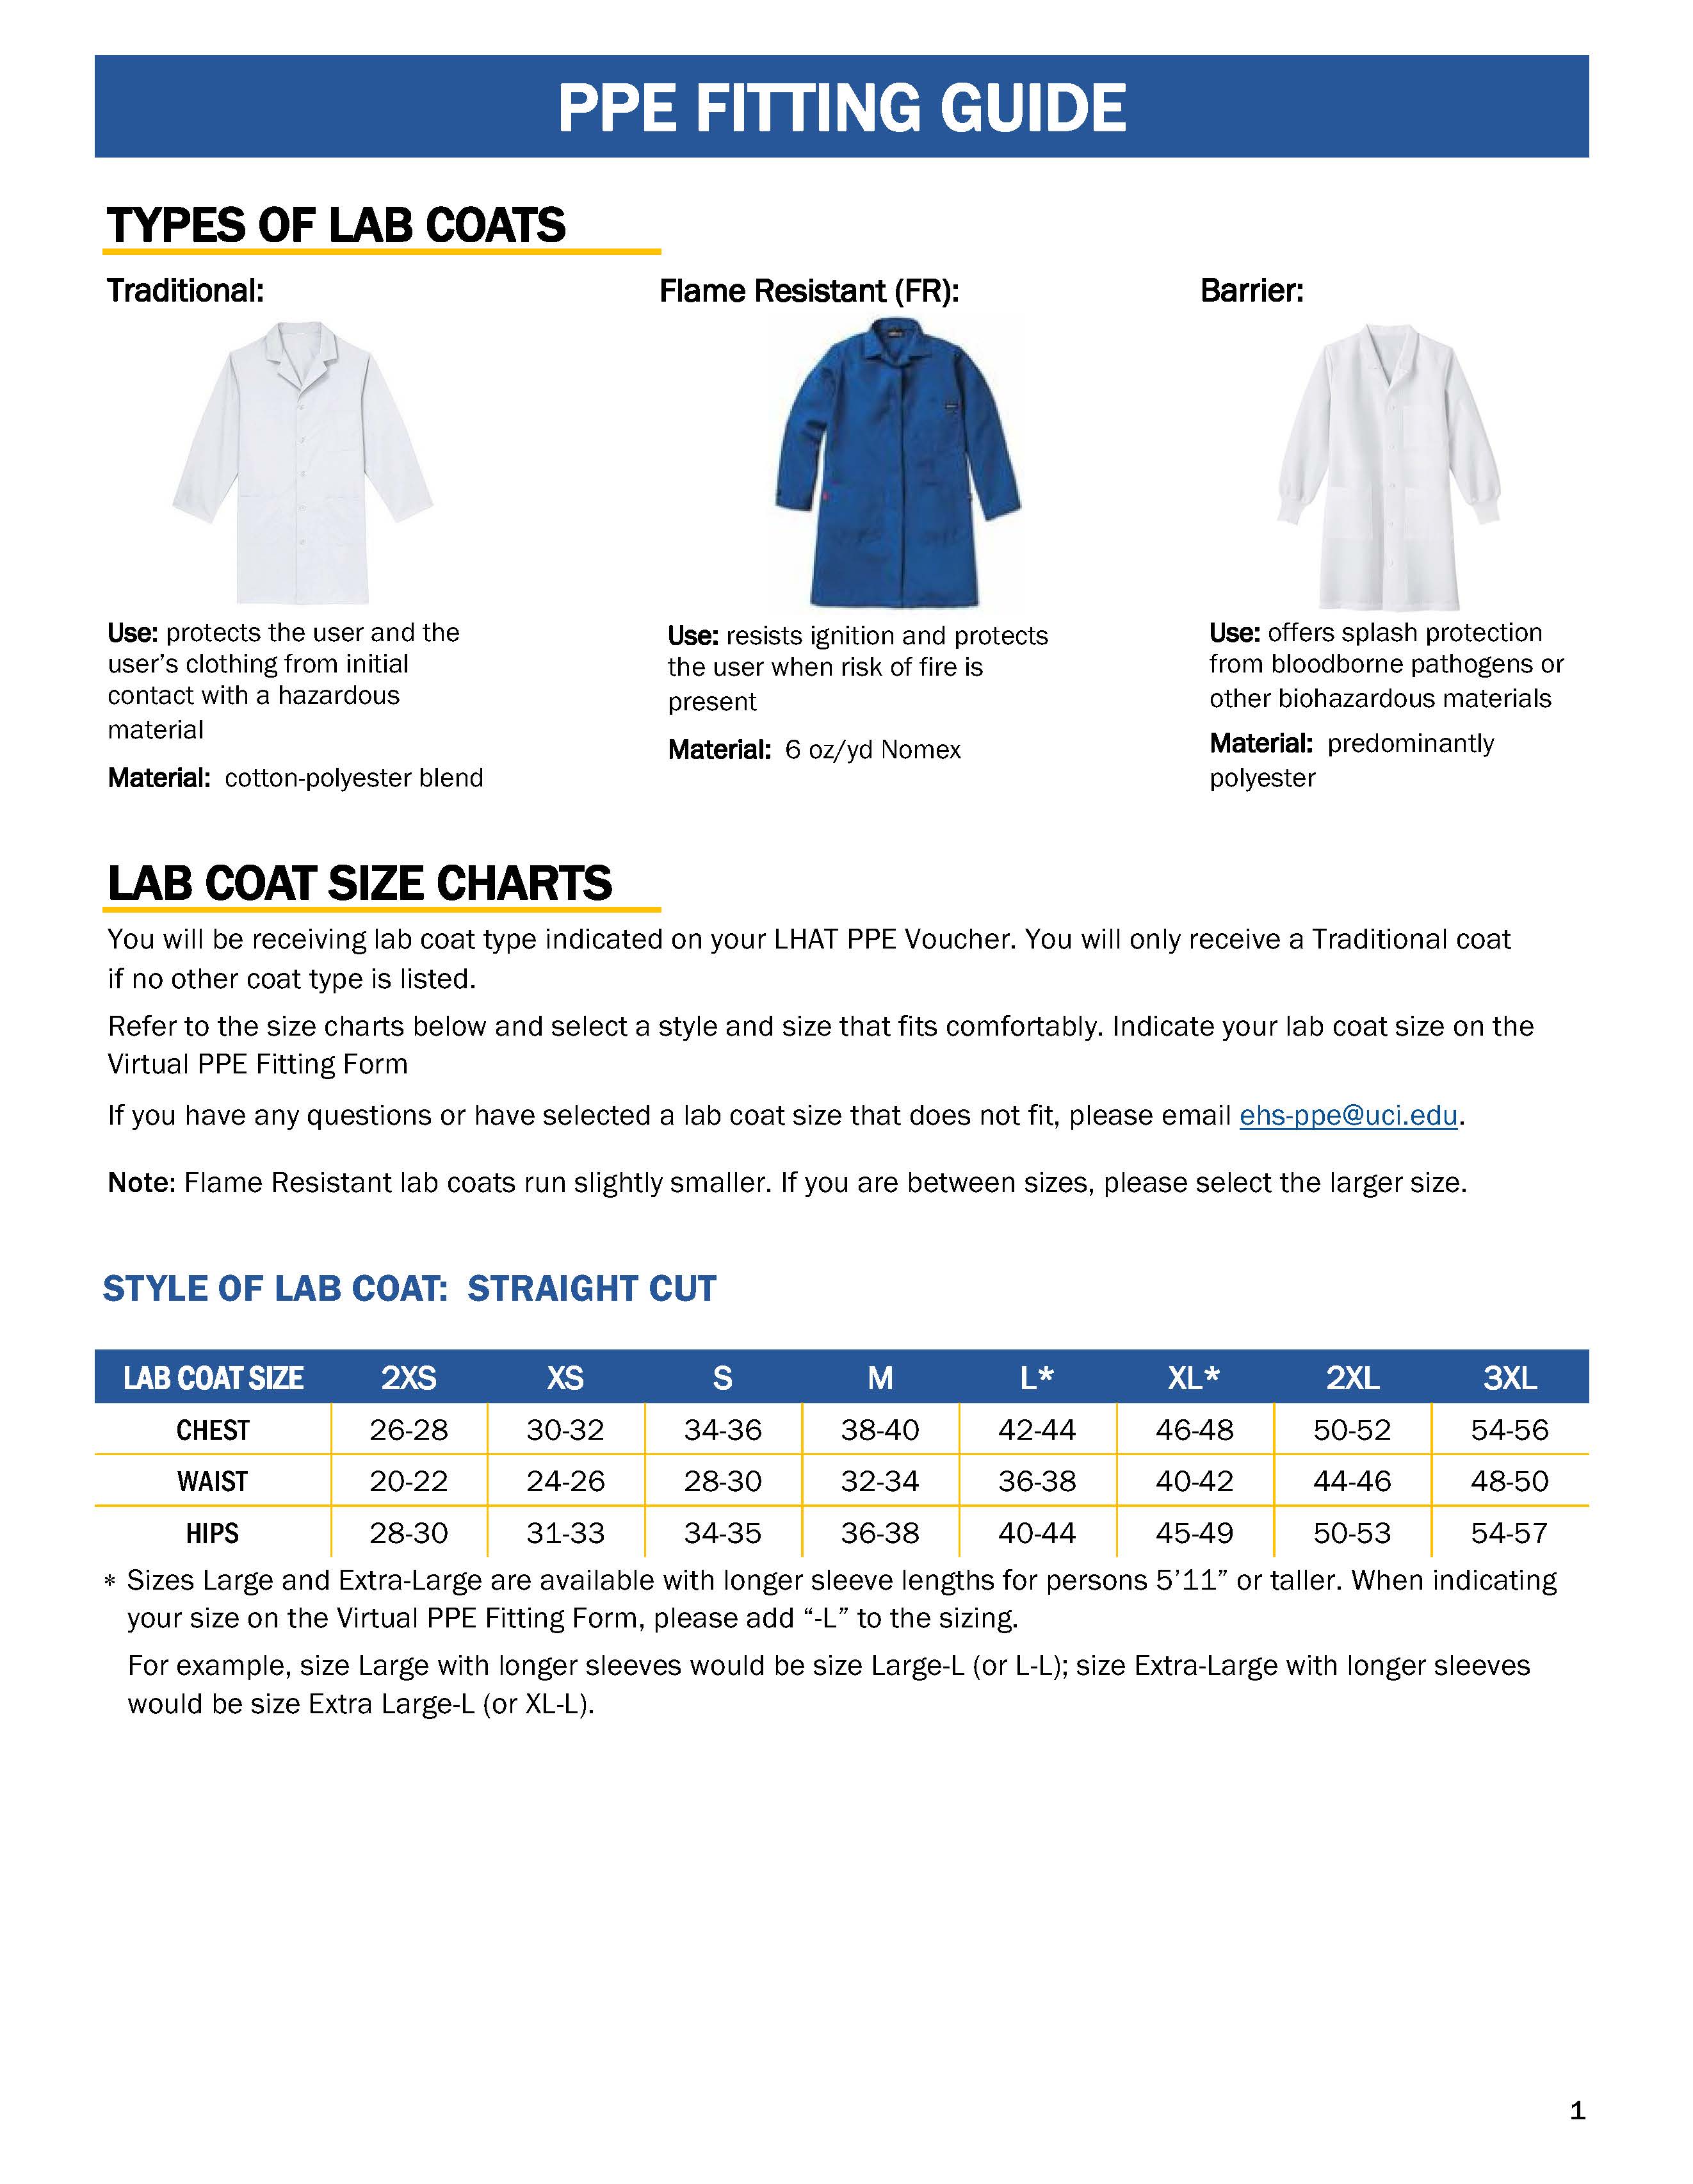 Lab Coat Fitting Guide document